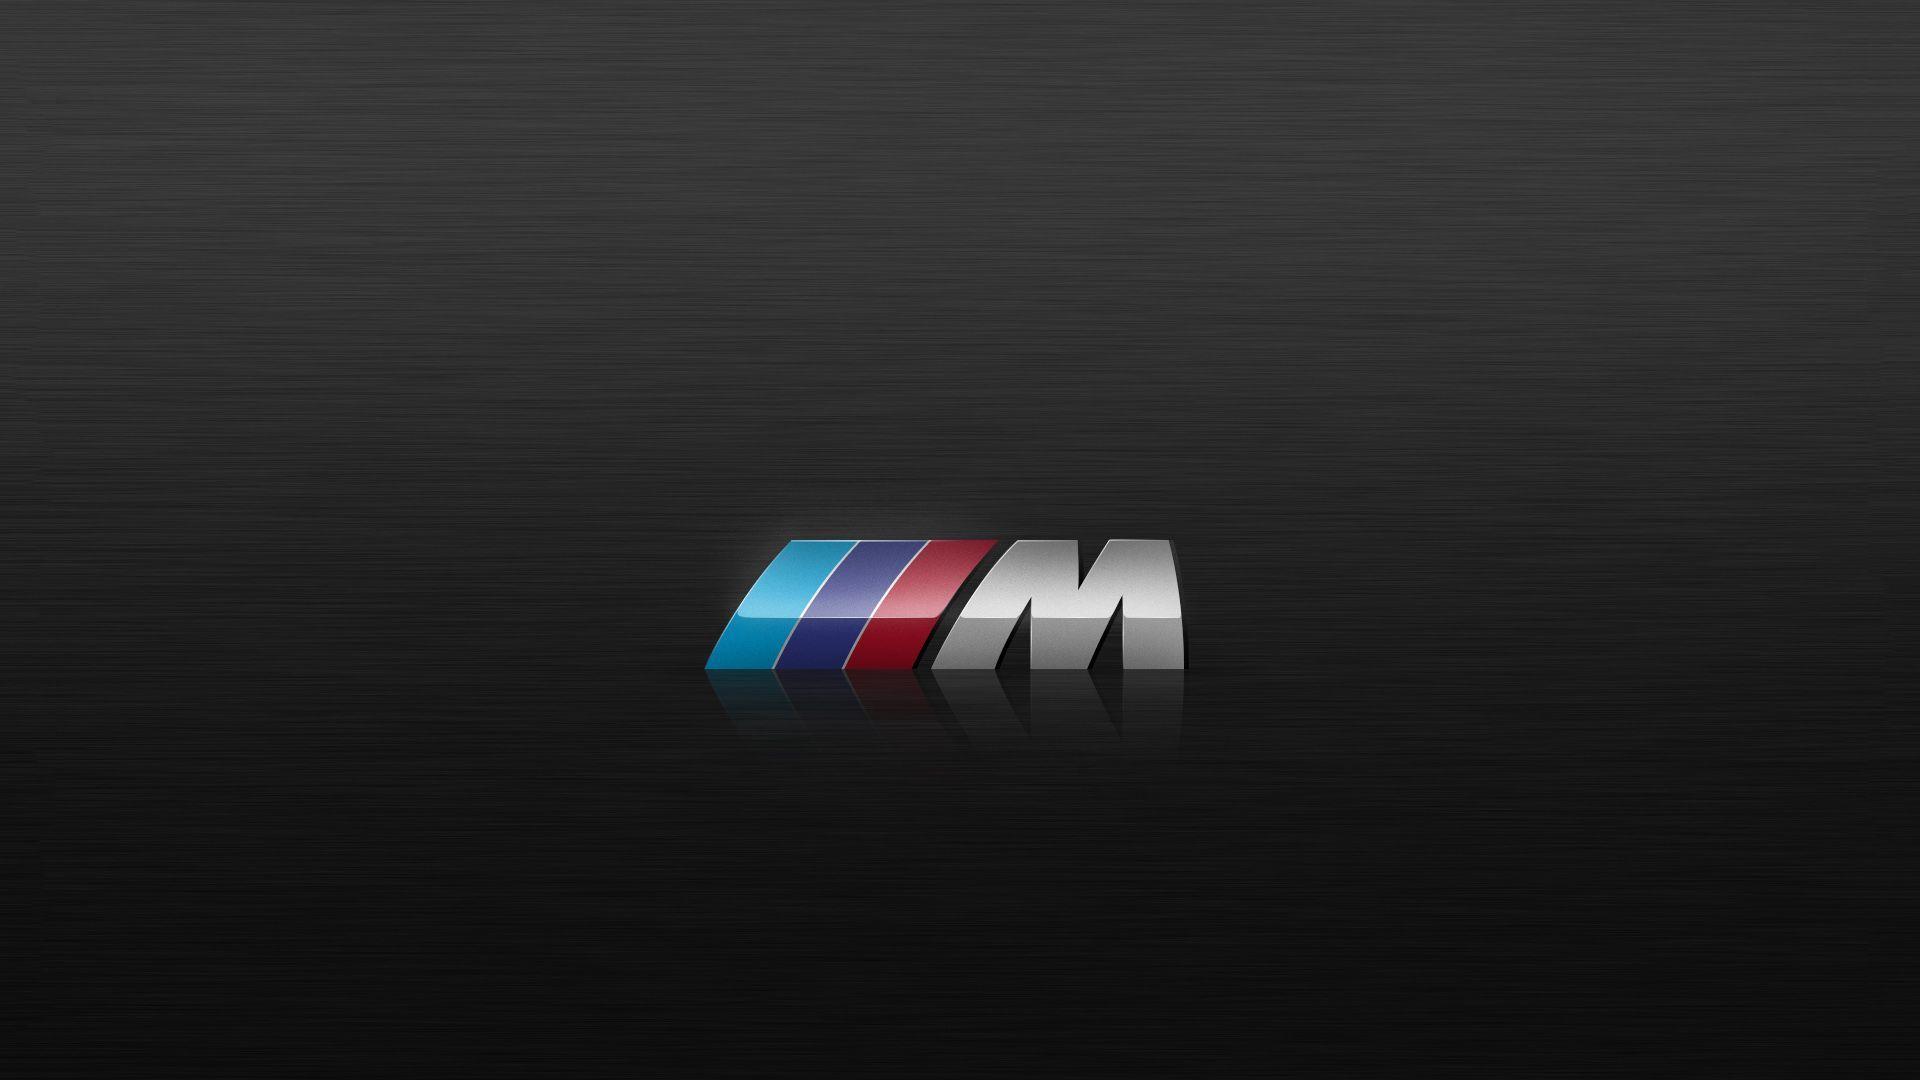 BMW Logo Background and Wallpaper download for free